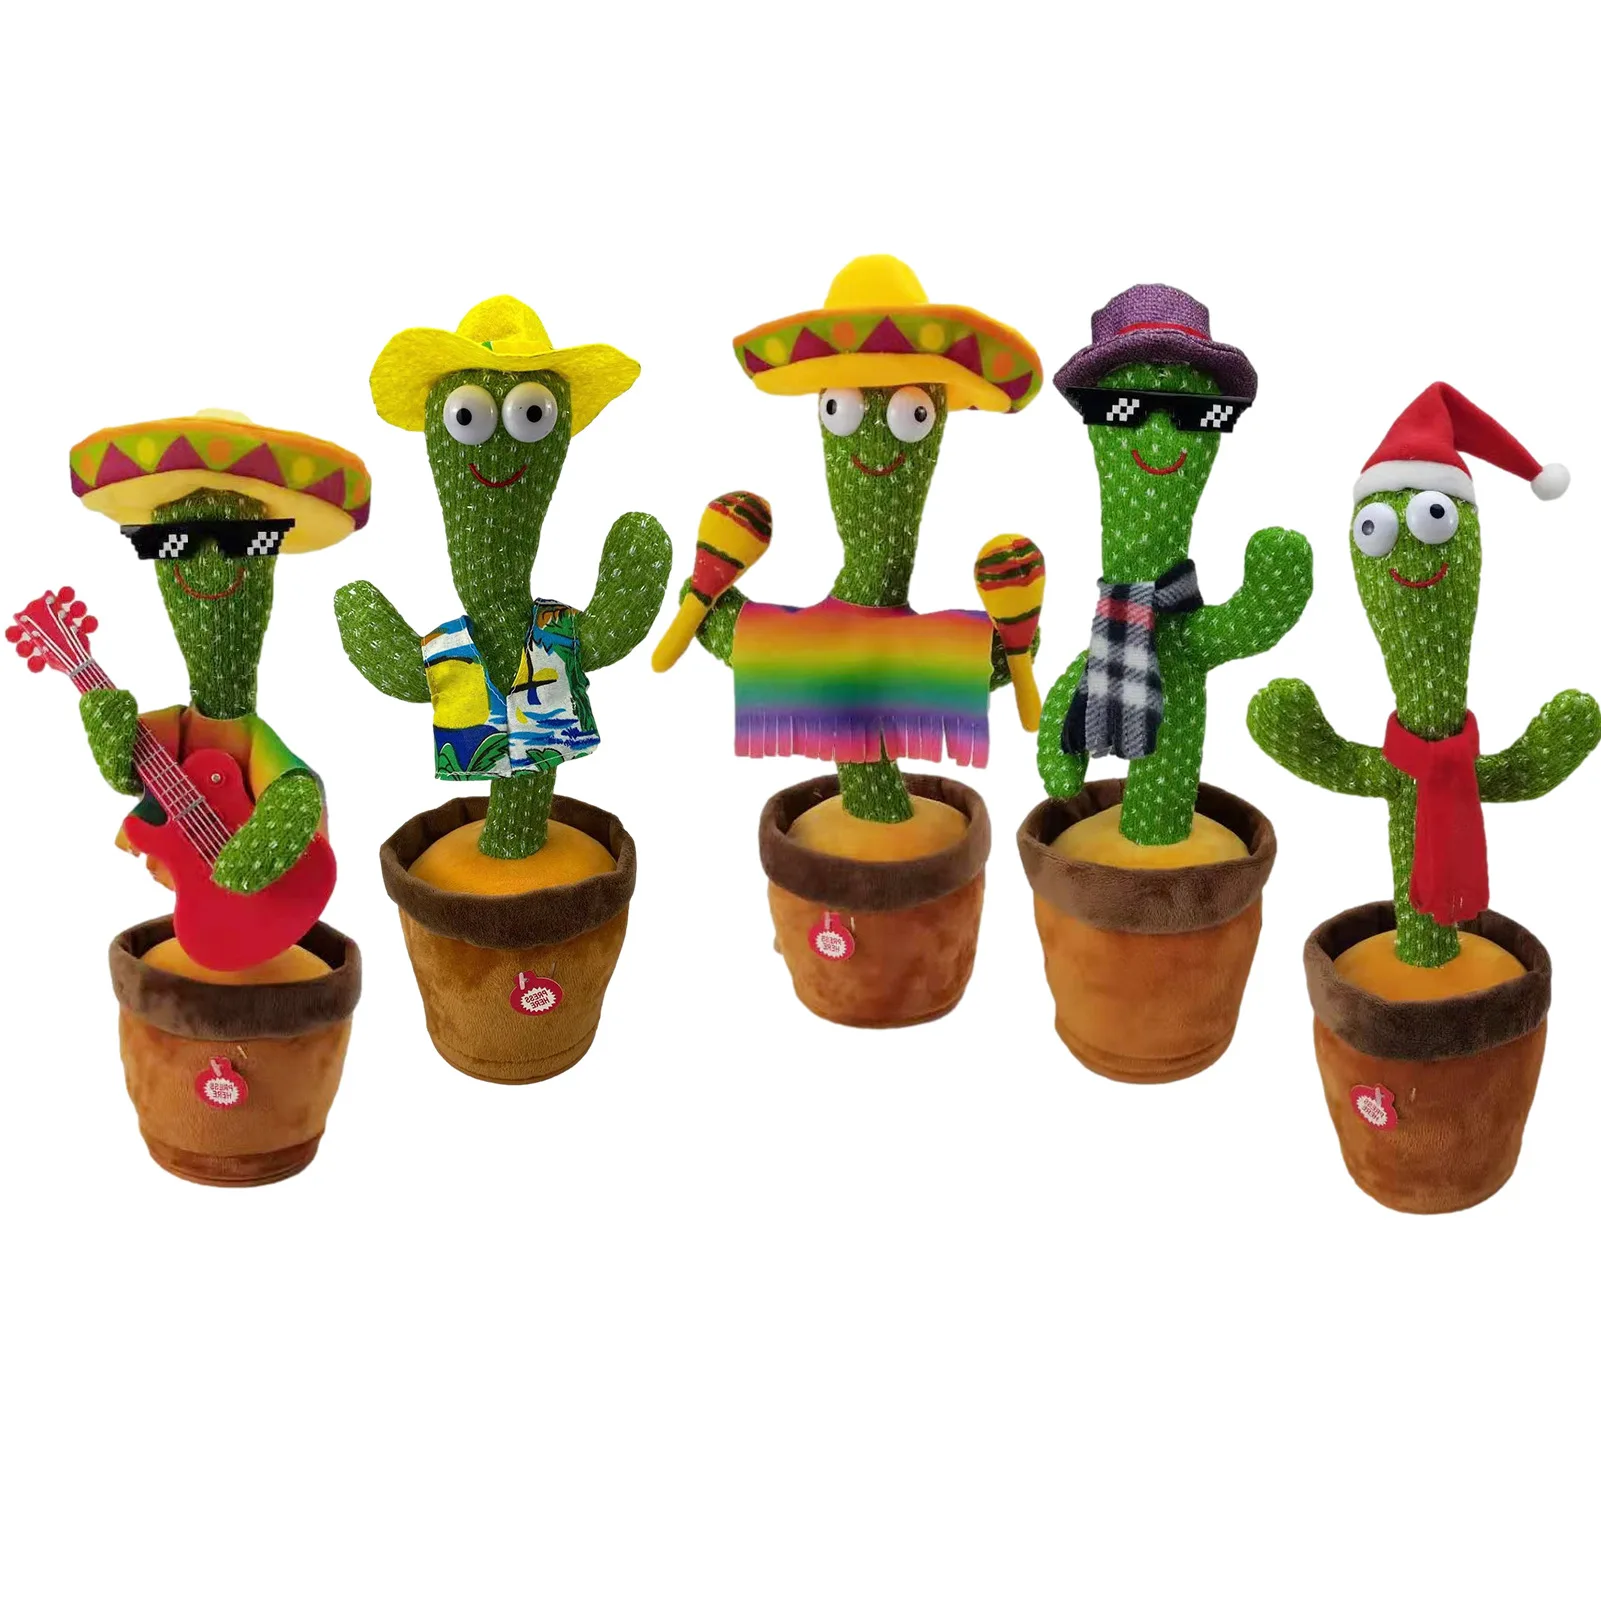 New Dancing Recording Cactus Kids Plush Toy Singing Party Home Decor Gift Xmas 